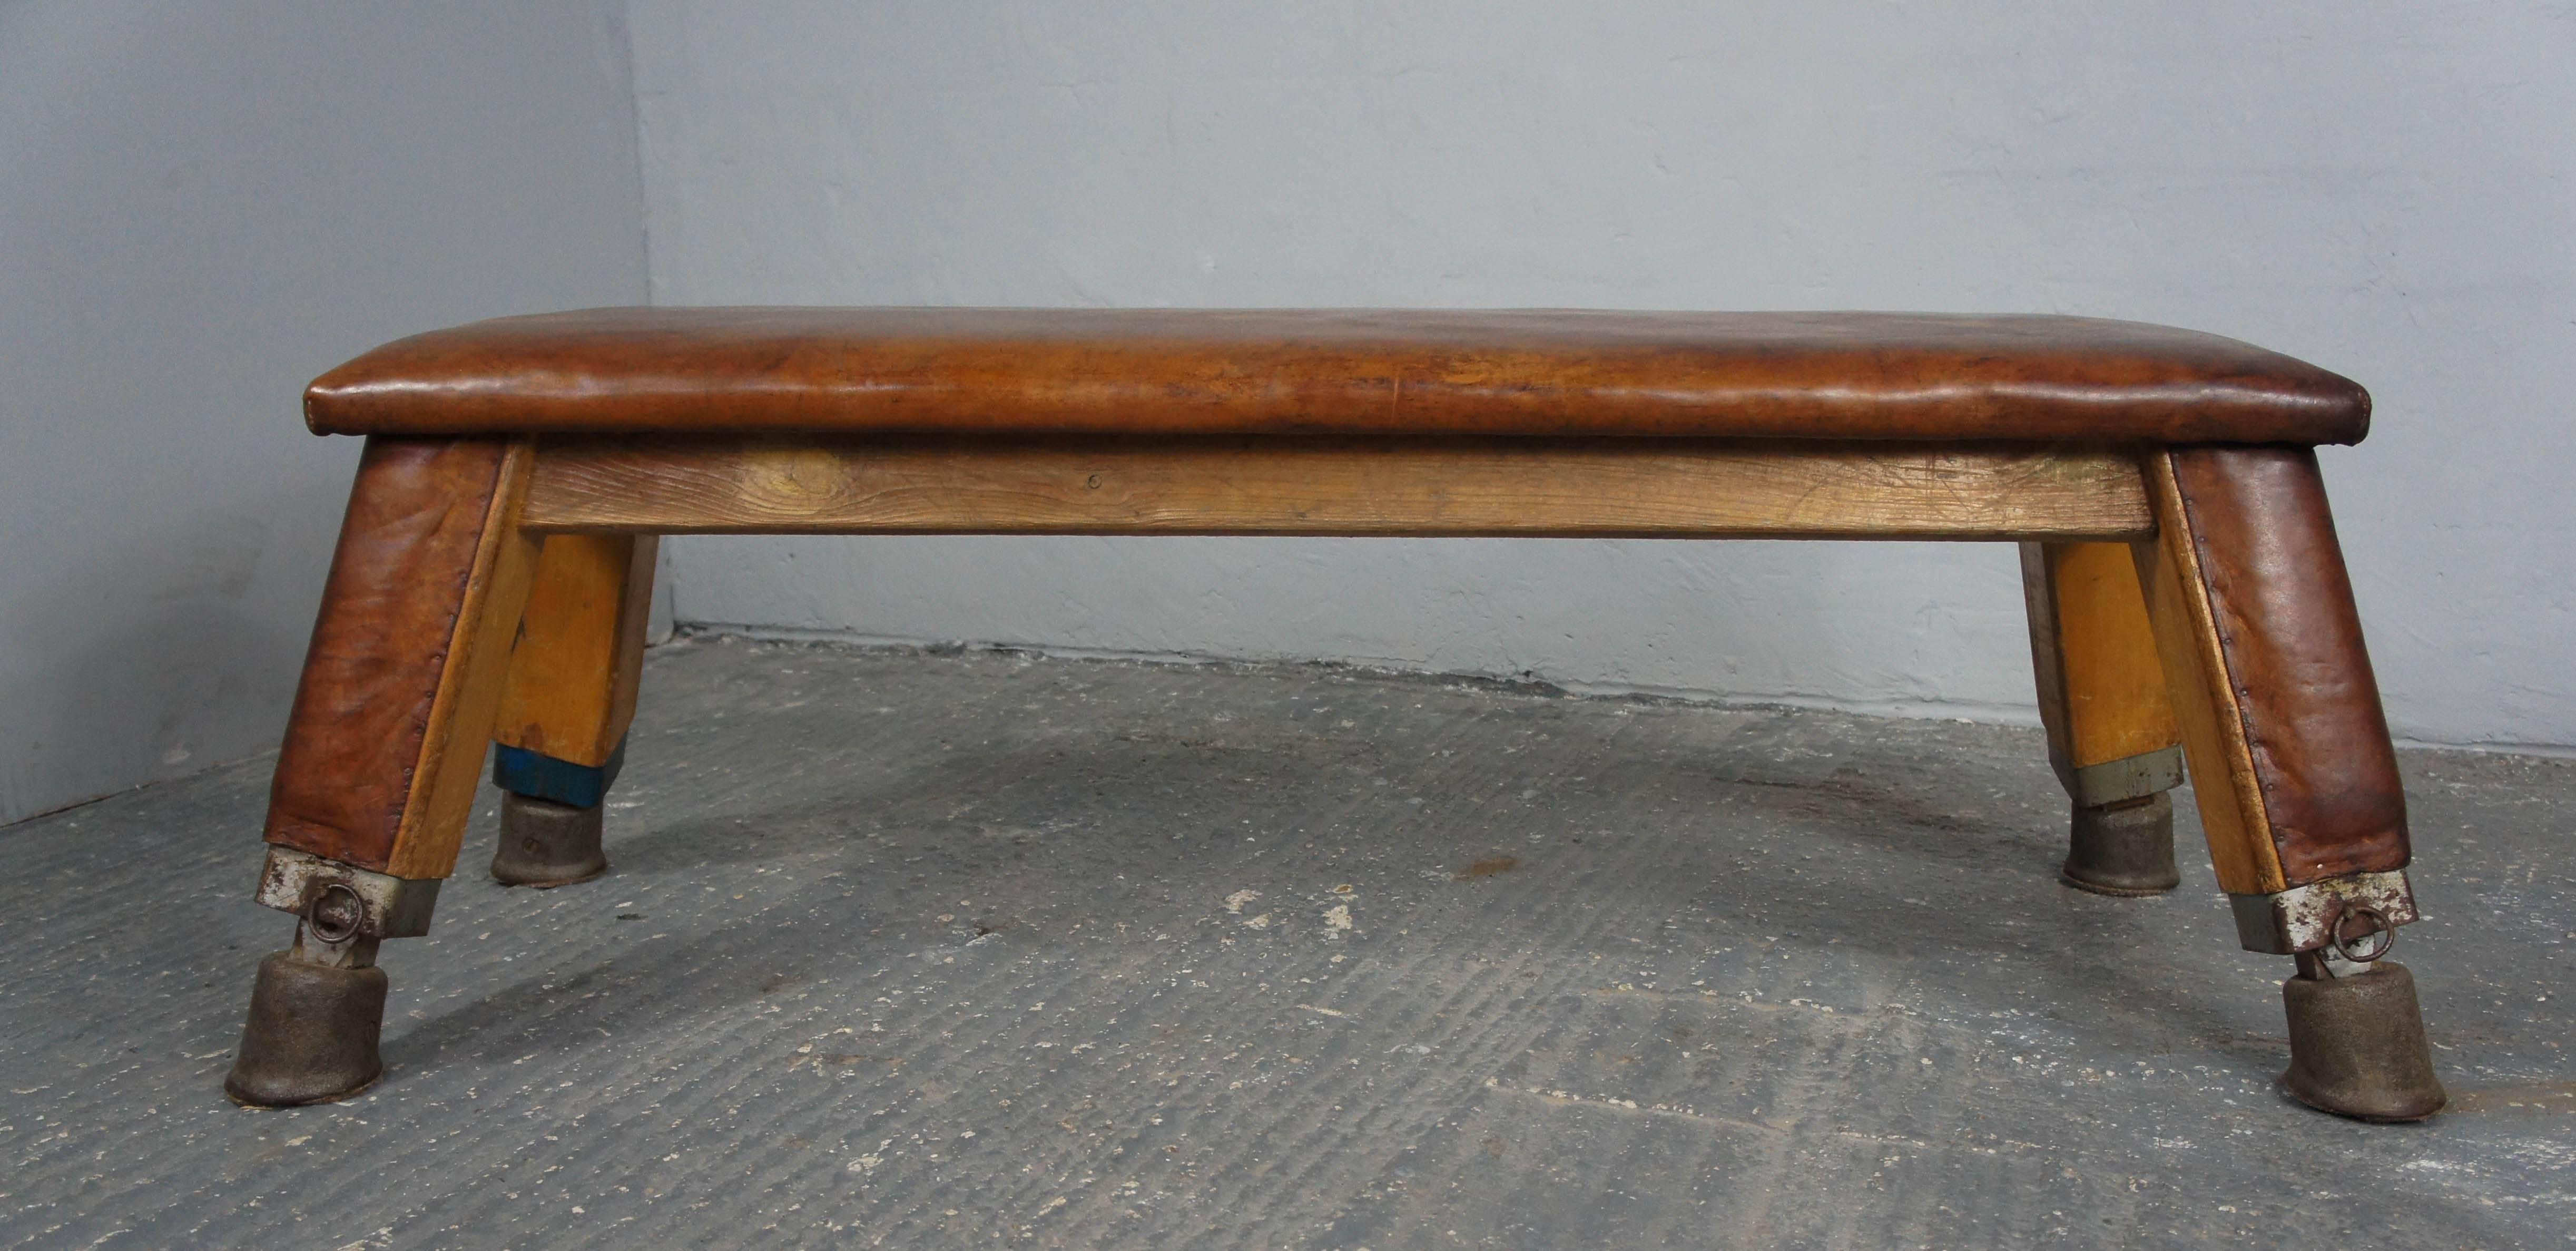 An original leather gym bench originating from the Czech Republic in the 1930s. It is in excellent condition with no rips or holes in the leather. Great as coffee tables.